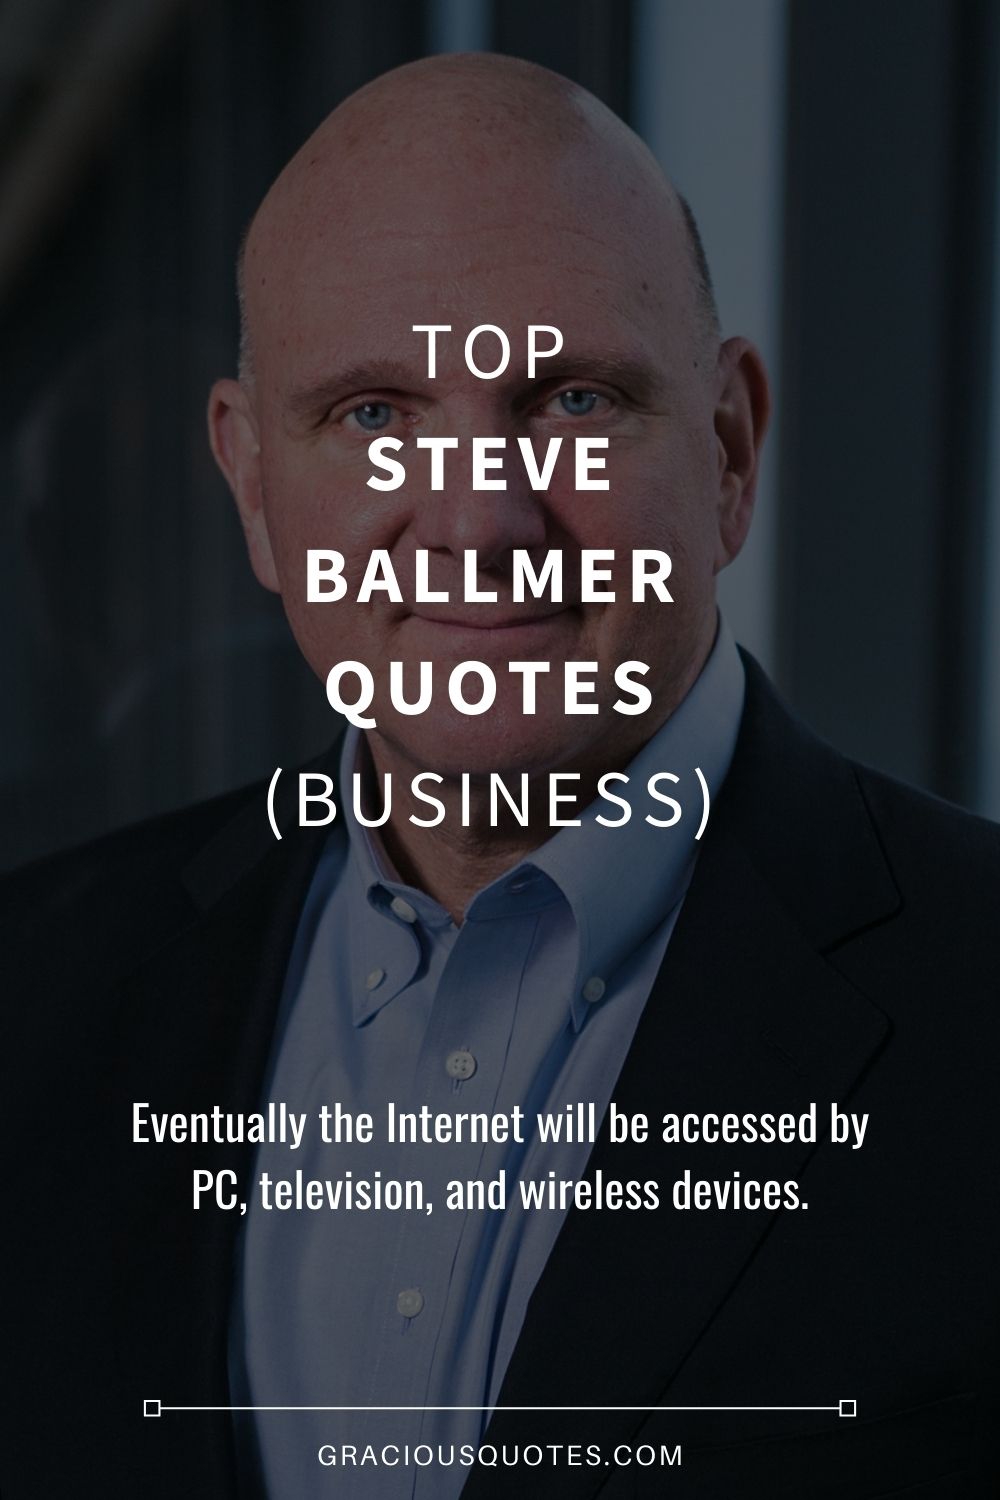 Top Steve Ballmer Quotes (BUSINESS) - Gracious Quotes